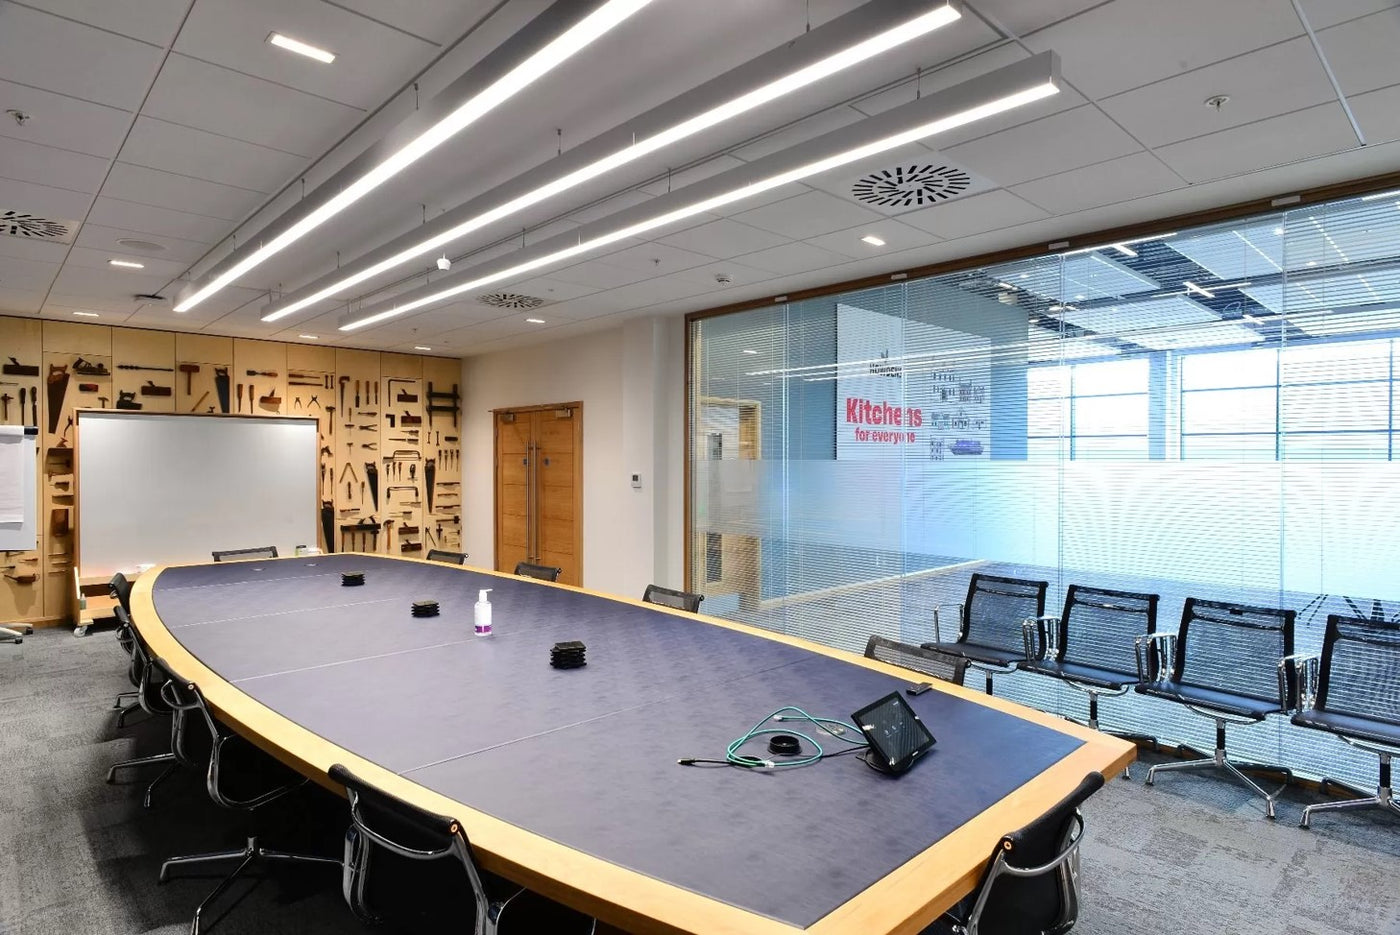 Ceiling Tiles in a conference room